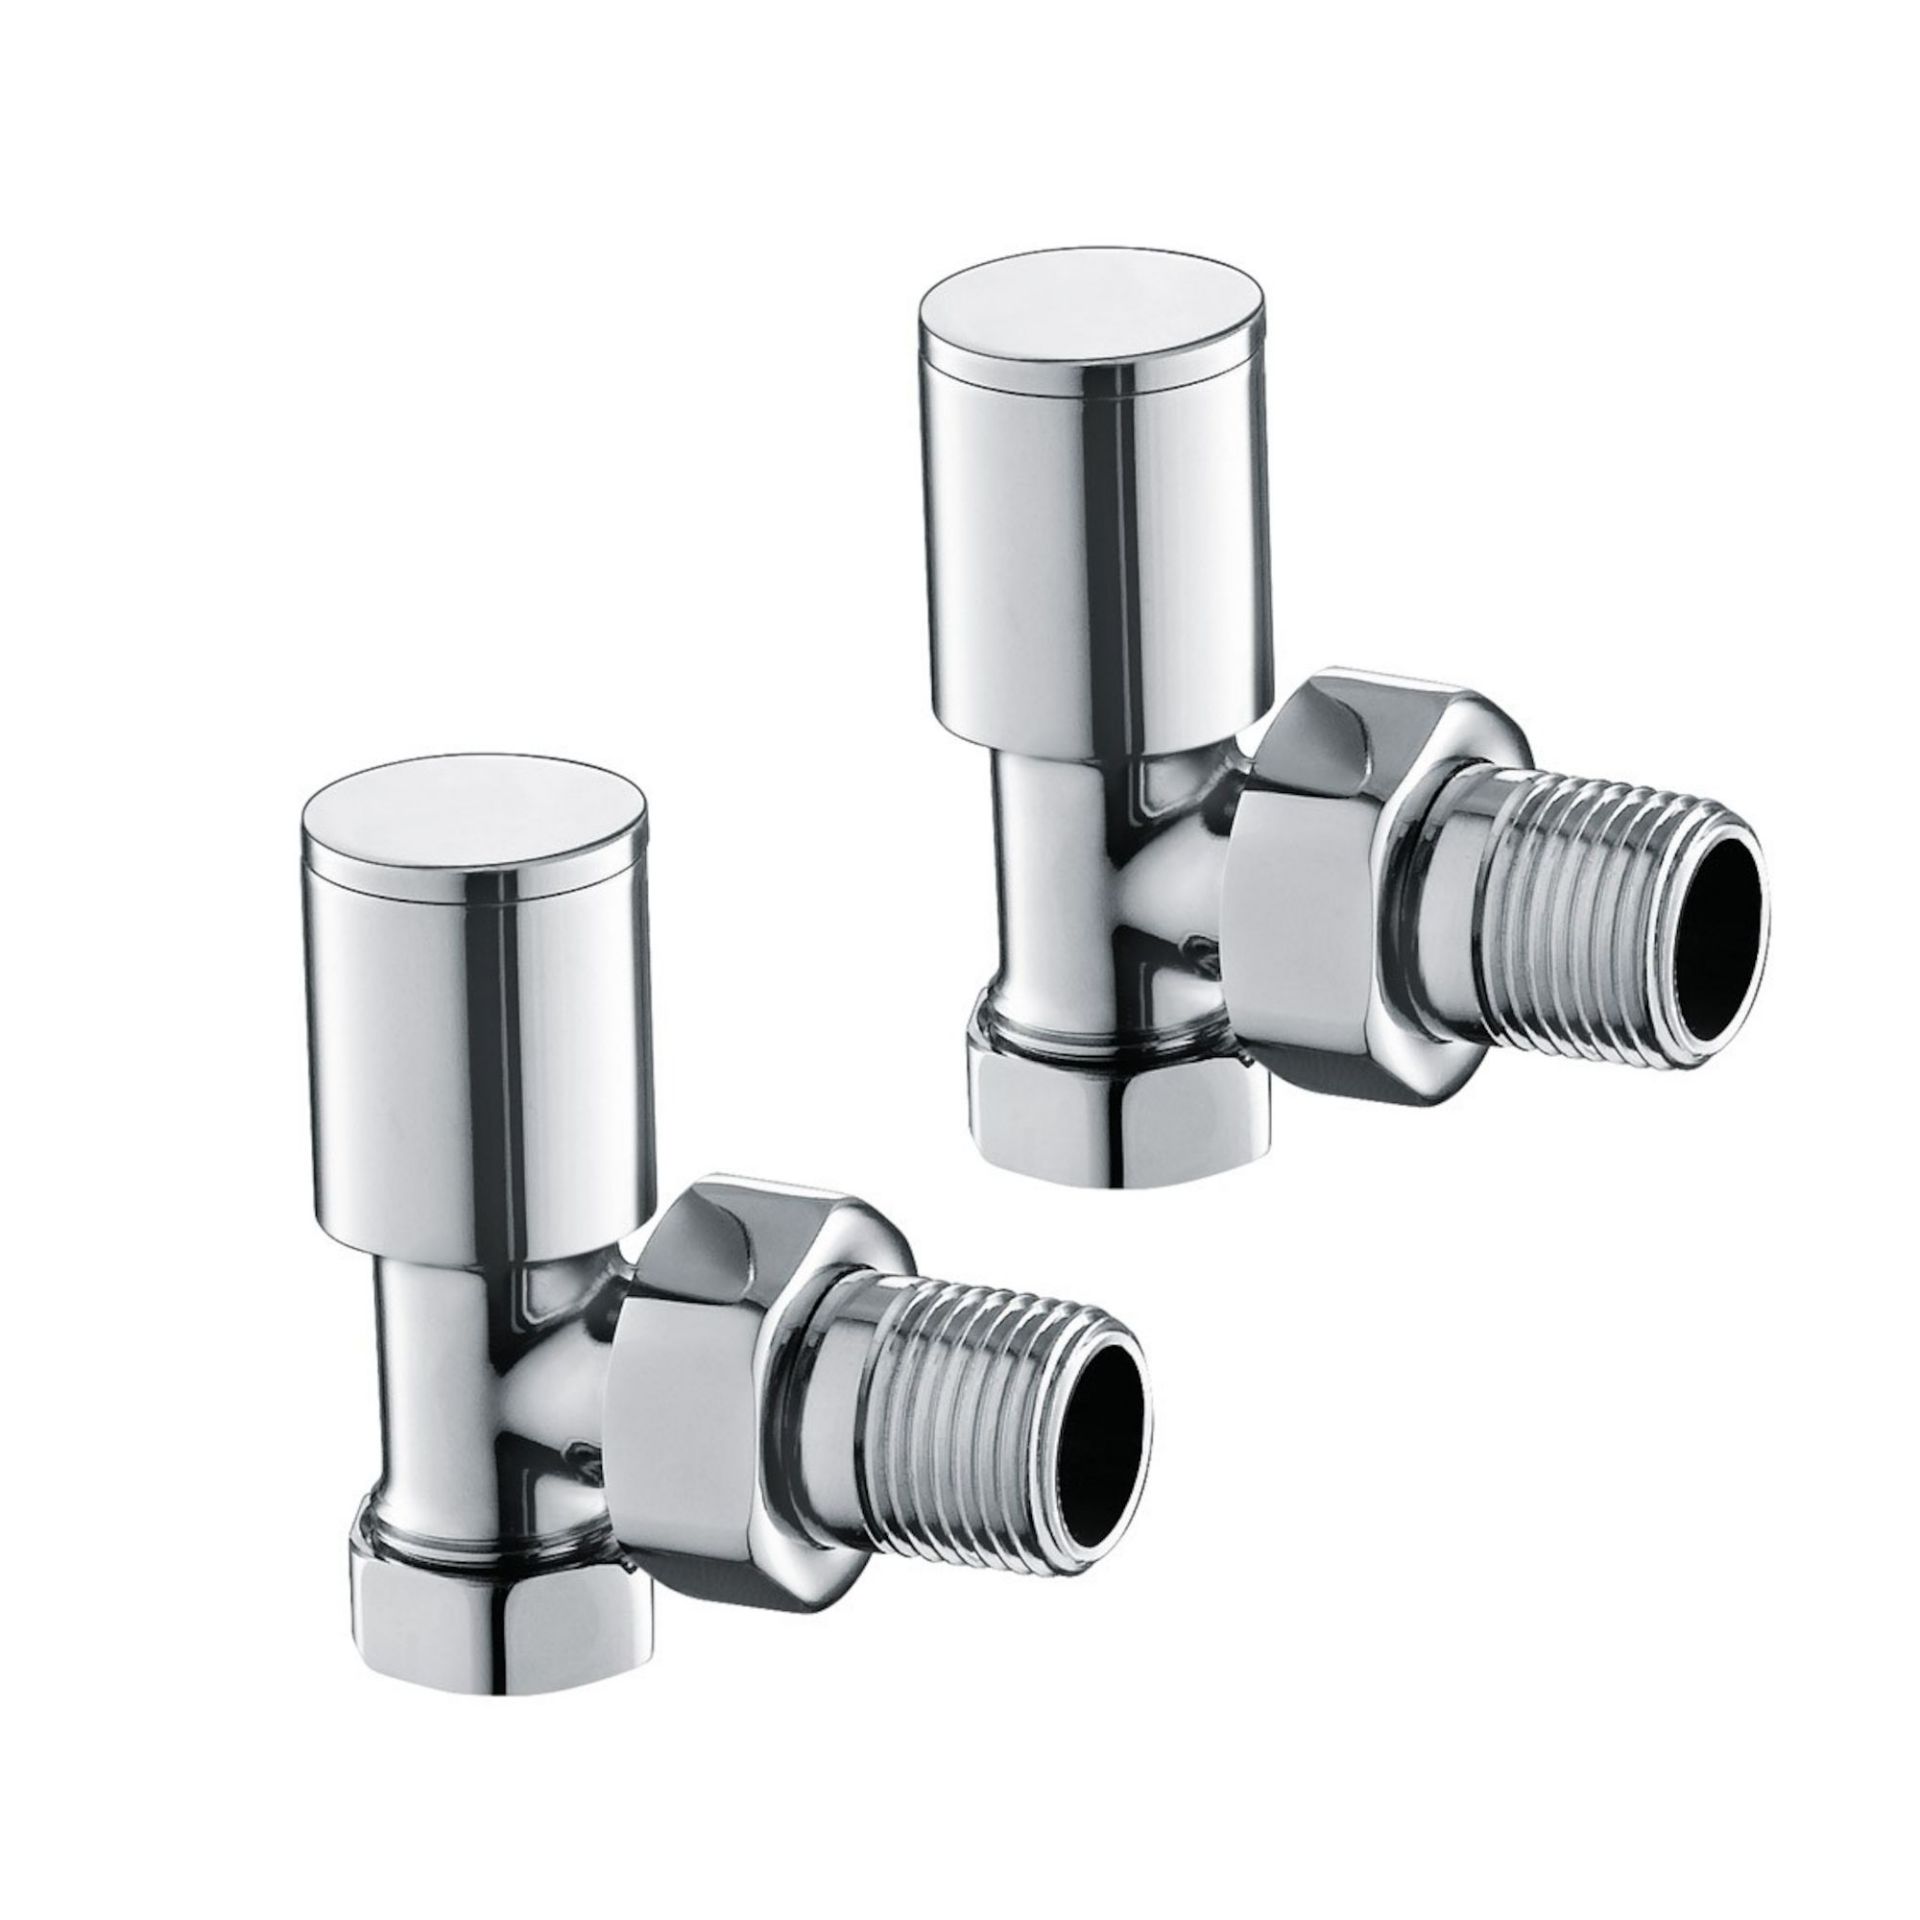 NEW (NV1019) 15mm Standard Connection Angled Radiator Valves - Heavy Duty Polished Chrome Plate... - Image 2 of 2